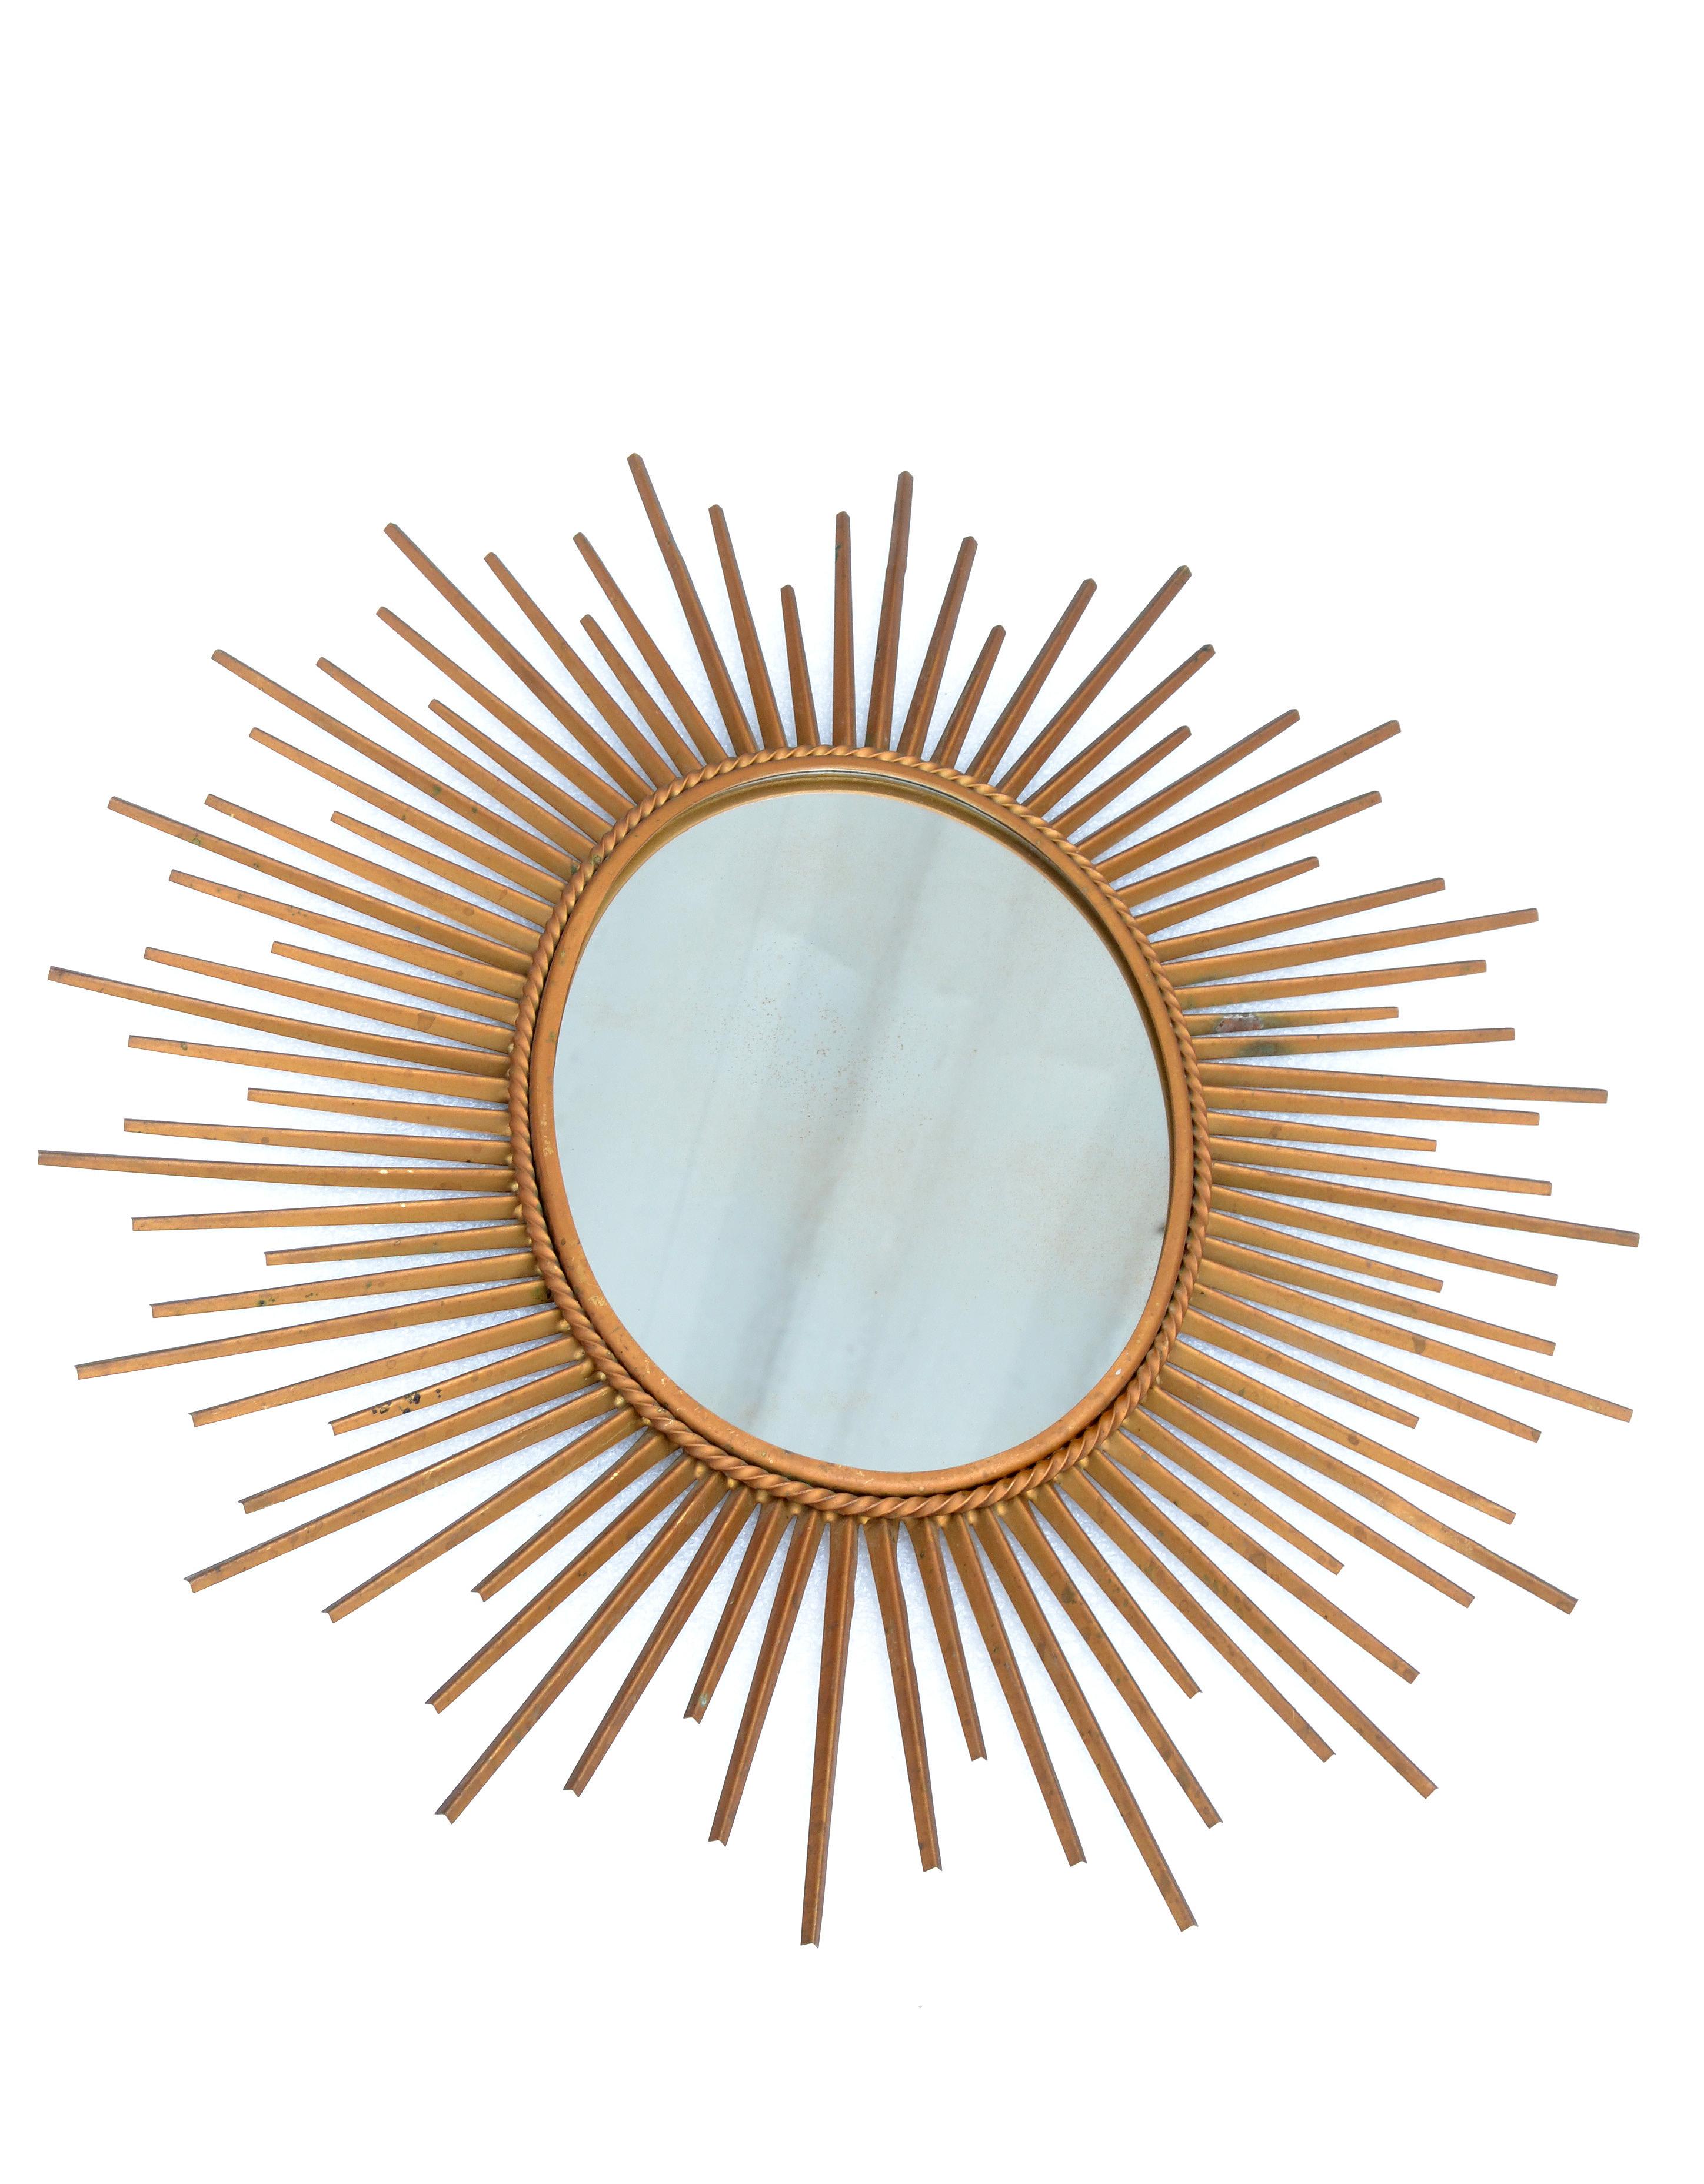 Chaty Vallauris Oval Metal Sunburst Wall Mirror Gold Finish France, 1970 In Good Condition For Sale In Miami, FL